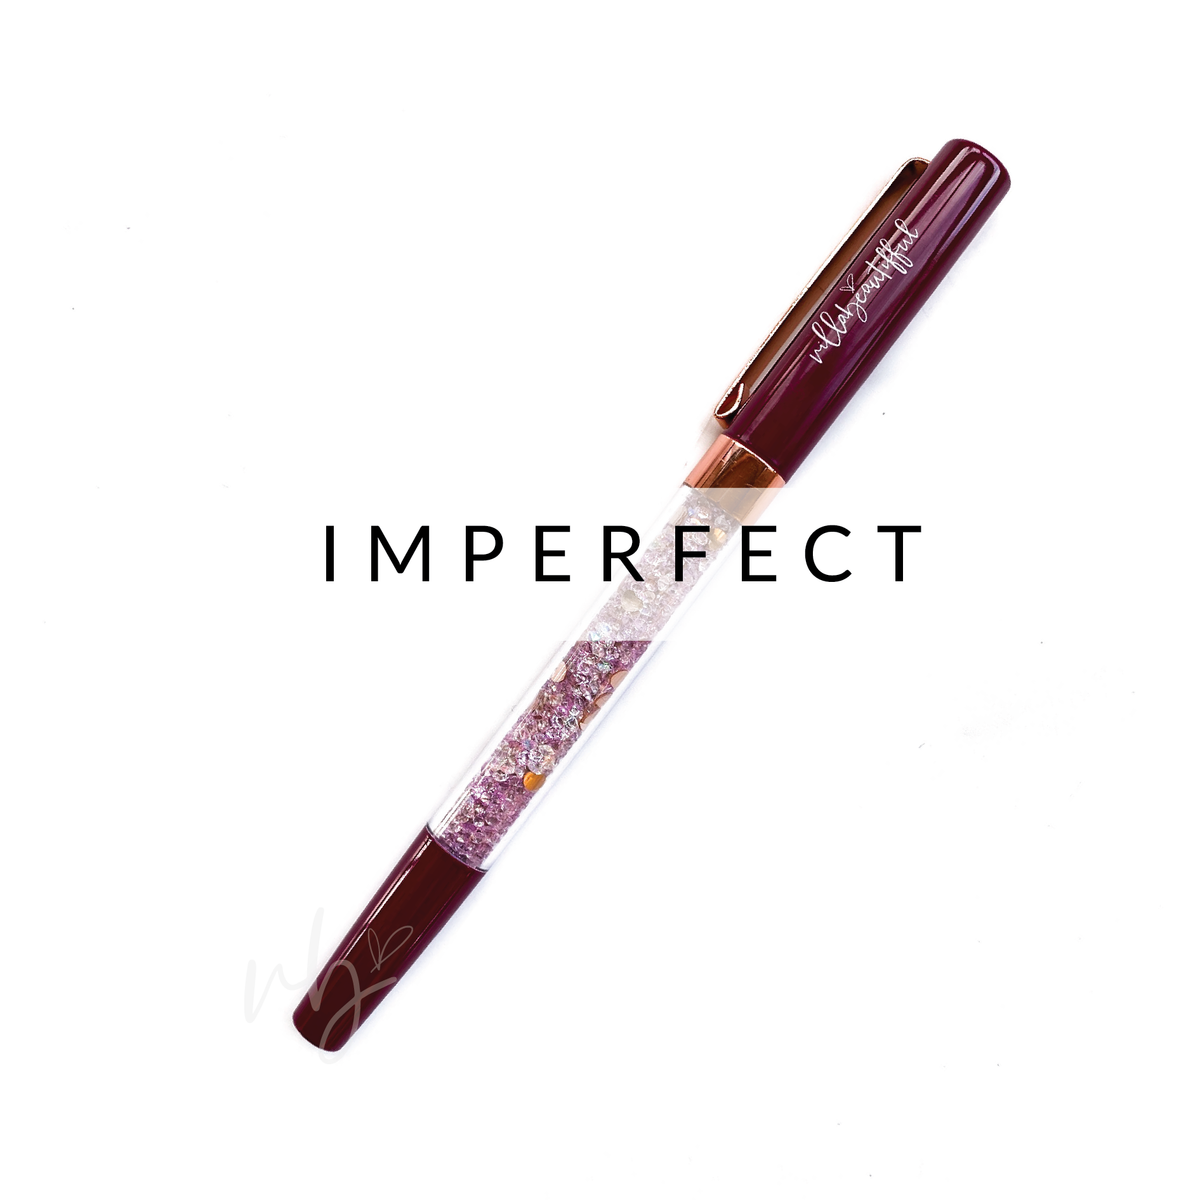 With Love Imperfect Crystal VBPen | limited kit pen